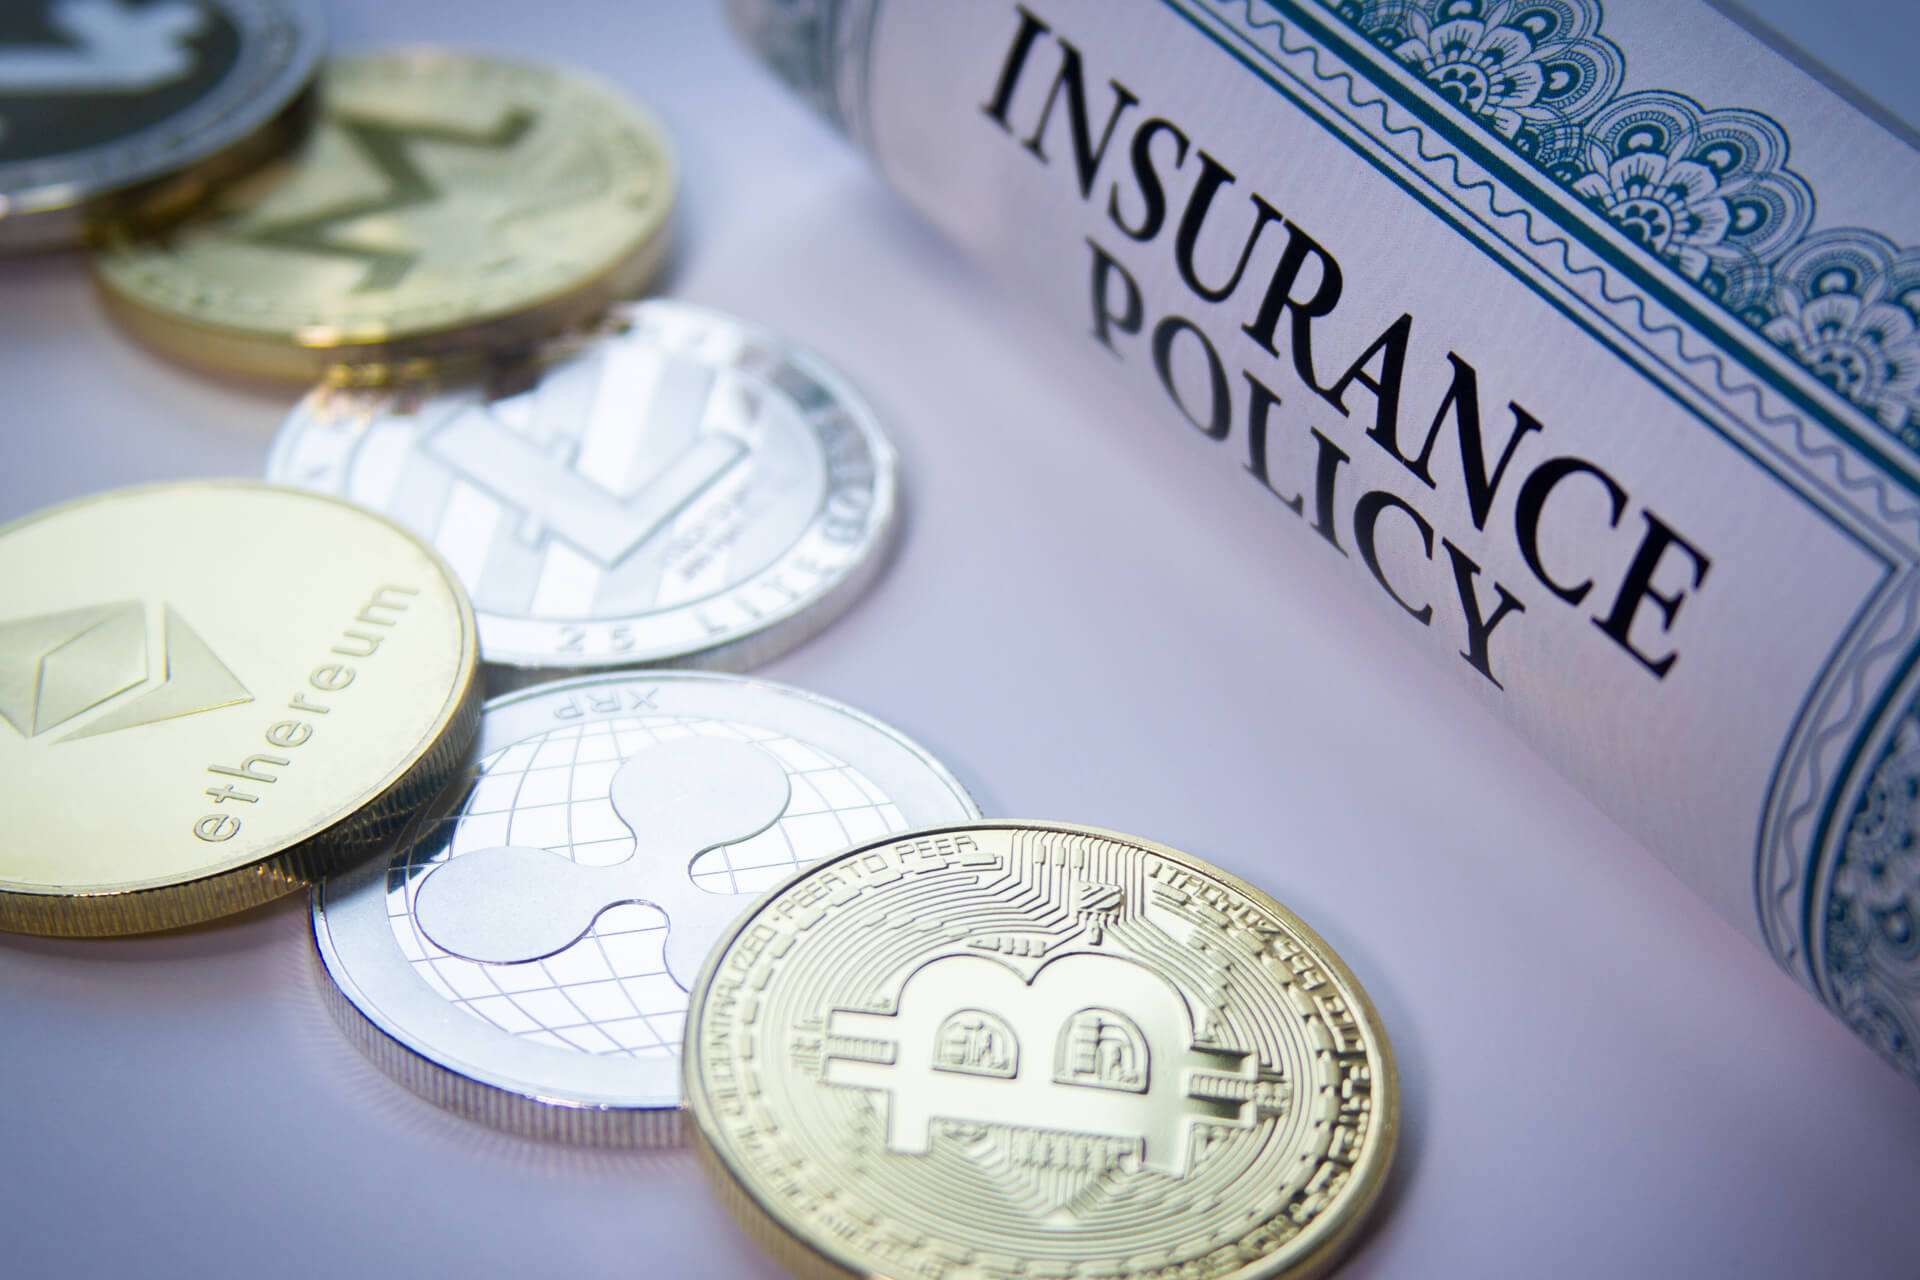 cryptocurrency exchange insurance